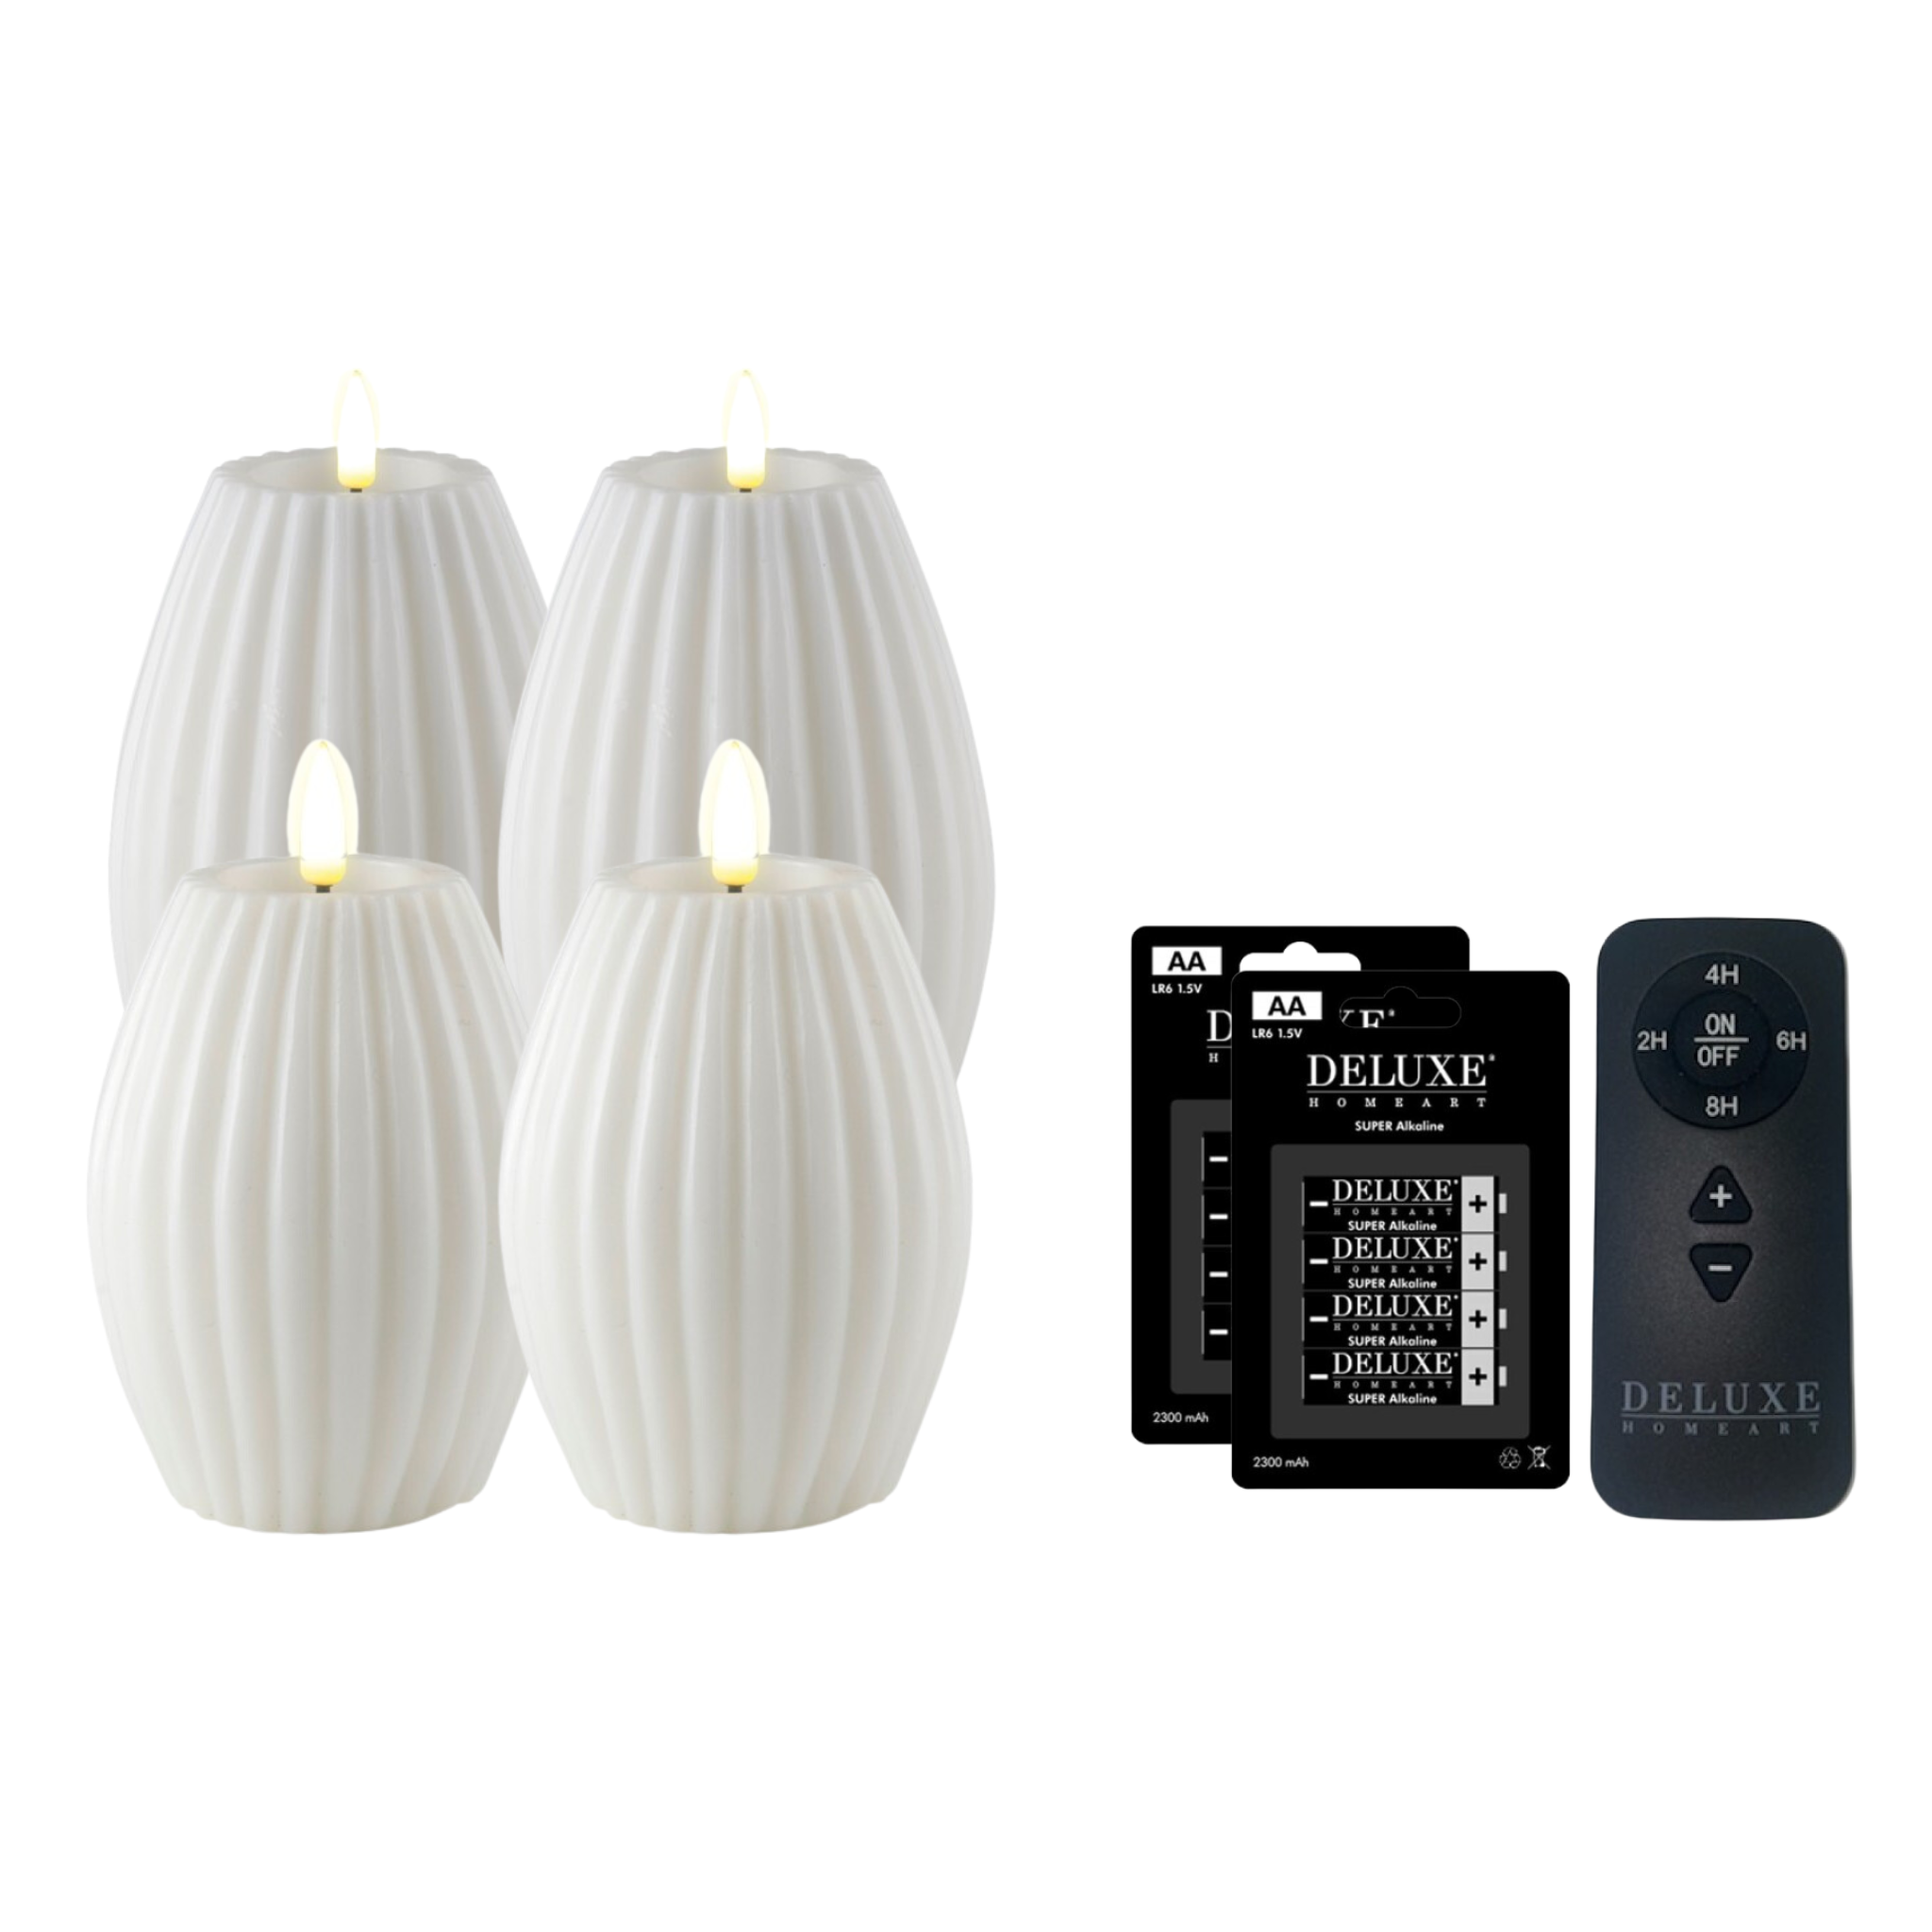 Deluxe Homeart LED candle set indoor oval white